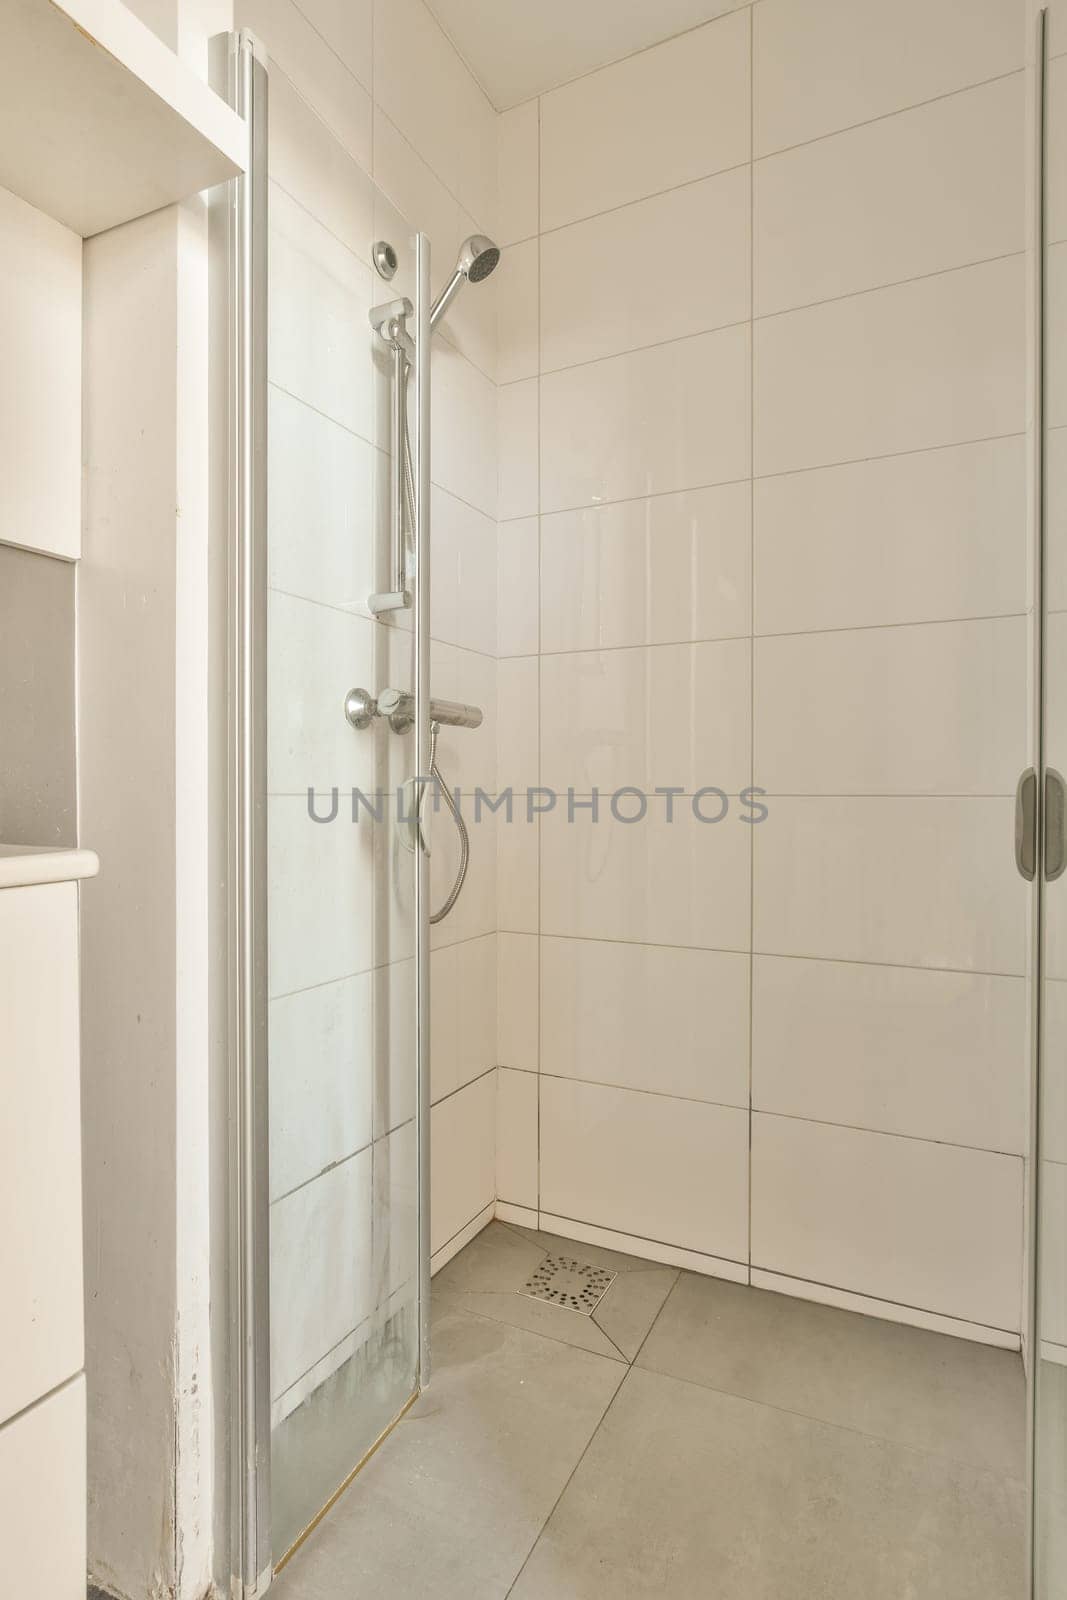 a bathroom with a shower stall in the corner and white tiles on the wall behind it, there is an open door